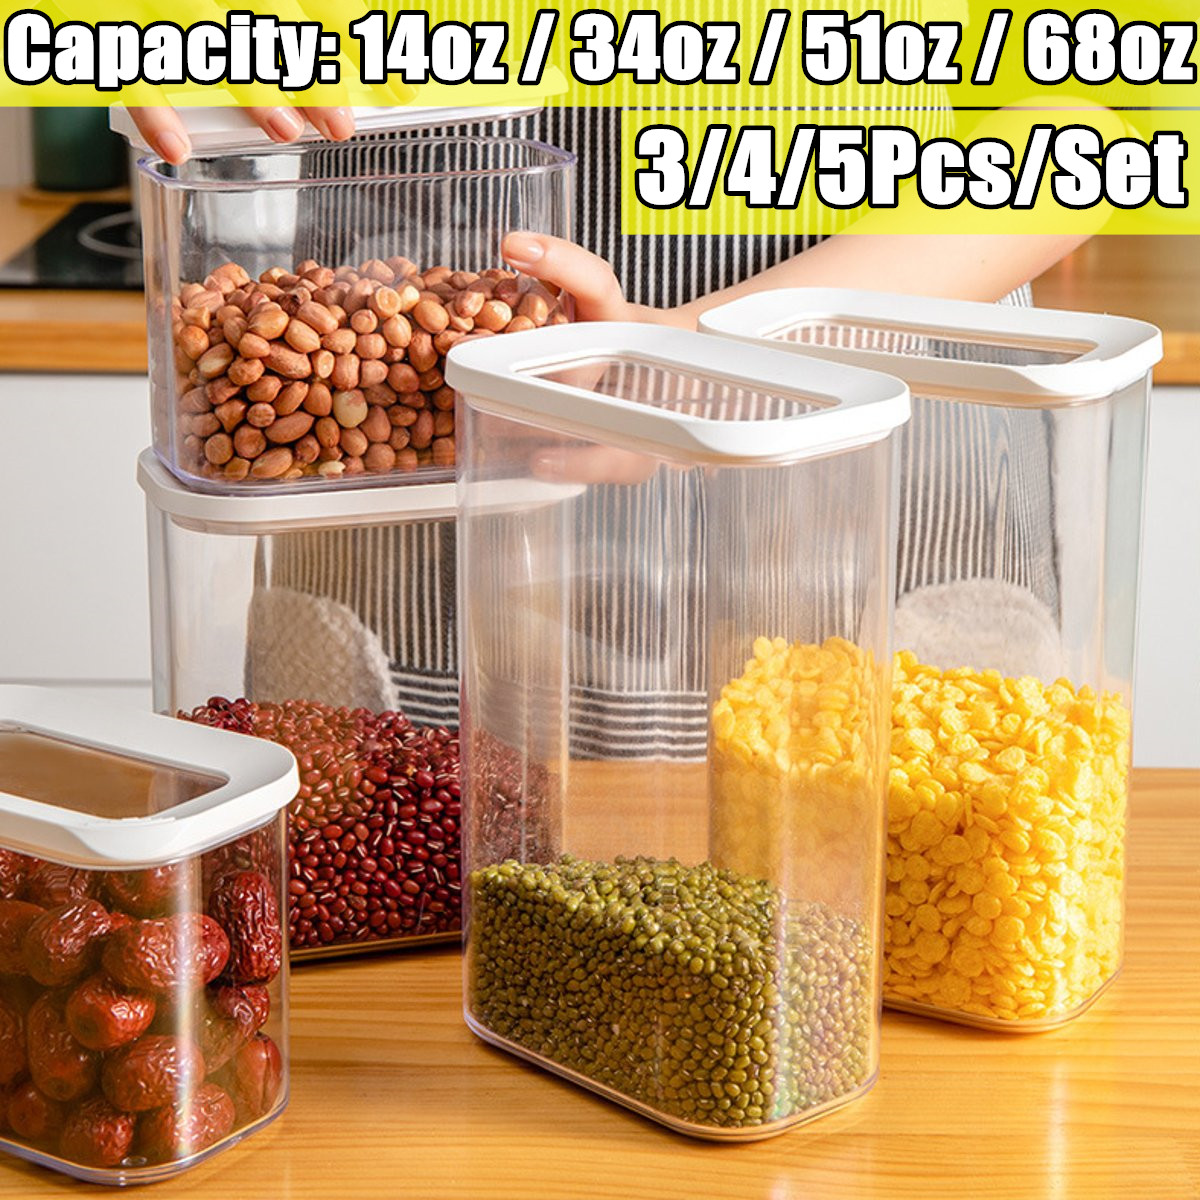 345Pcs-Airtight-Food-Storage-Containers-Kitchen-Canisters-Boxes-with-Lid-Set-1794081-1